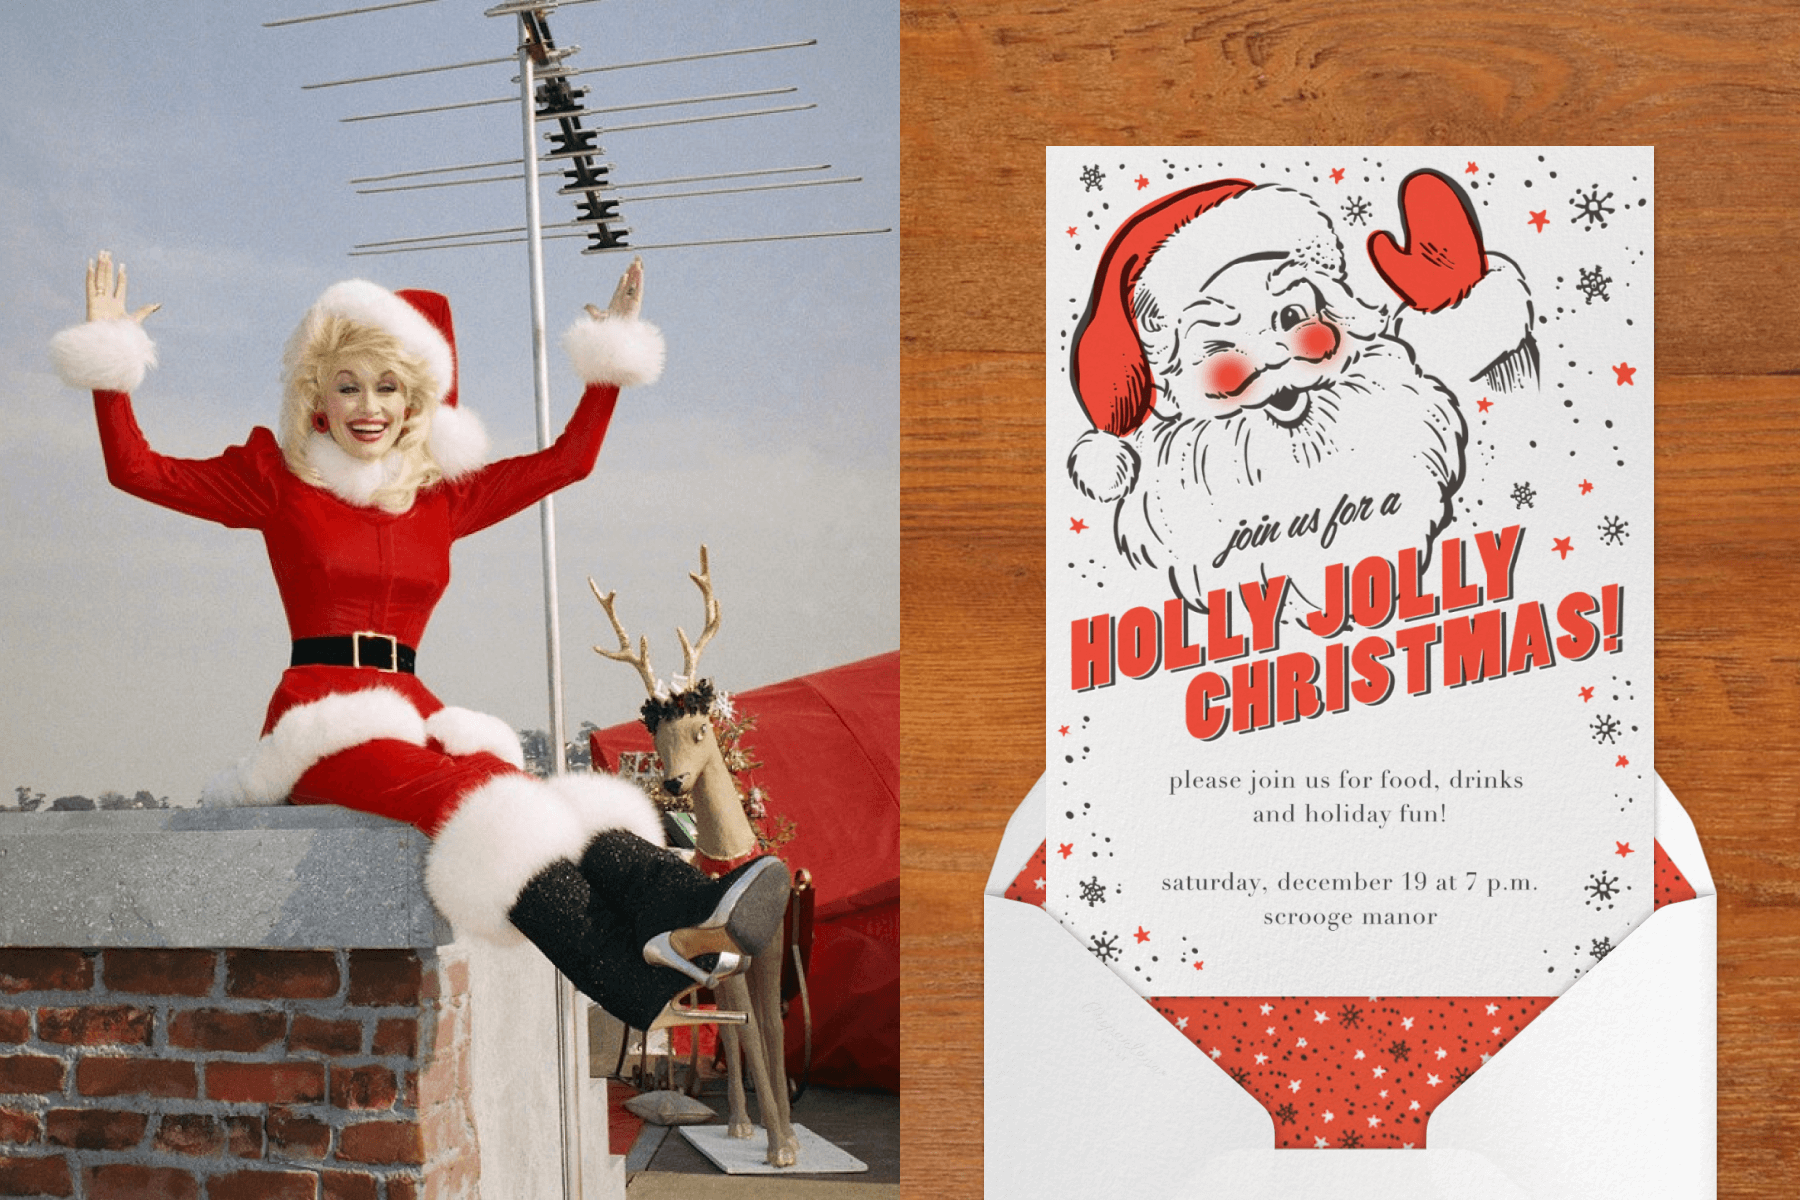 Dolly Parton wearing a red Santa Claus-inspired outfit sitting on a chimney top; an invitation for a “holly jolly Christmas” has a retro illustration of Santa Claus waving a red mitten.